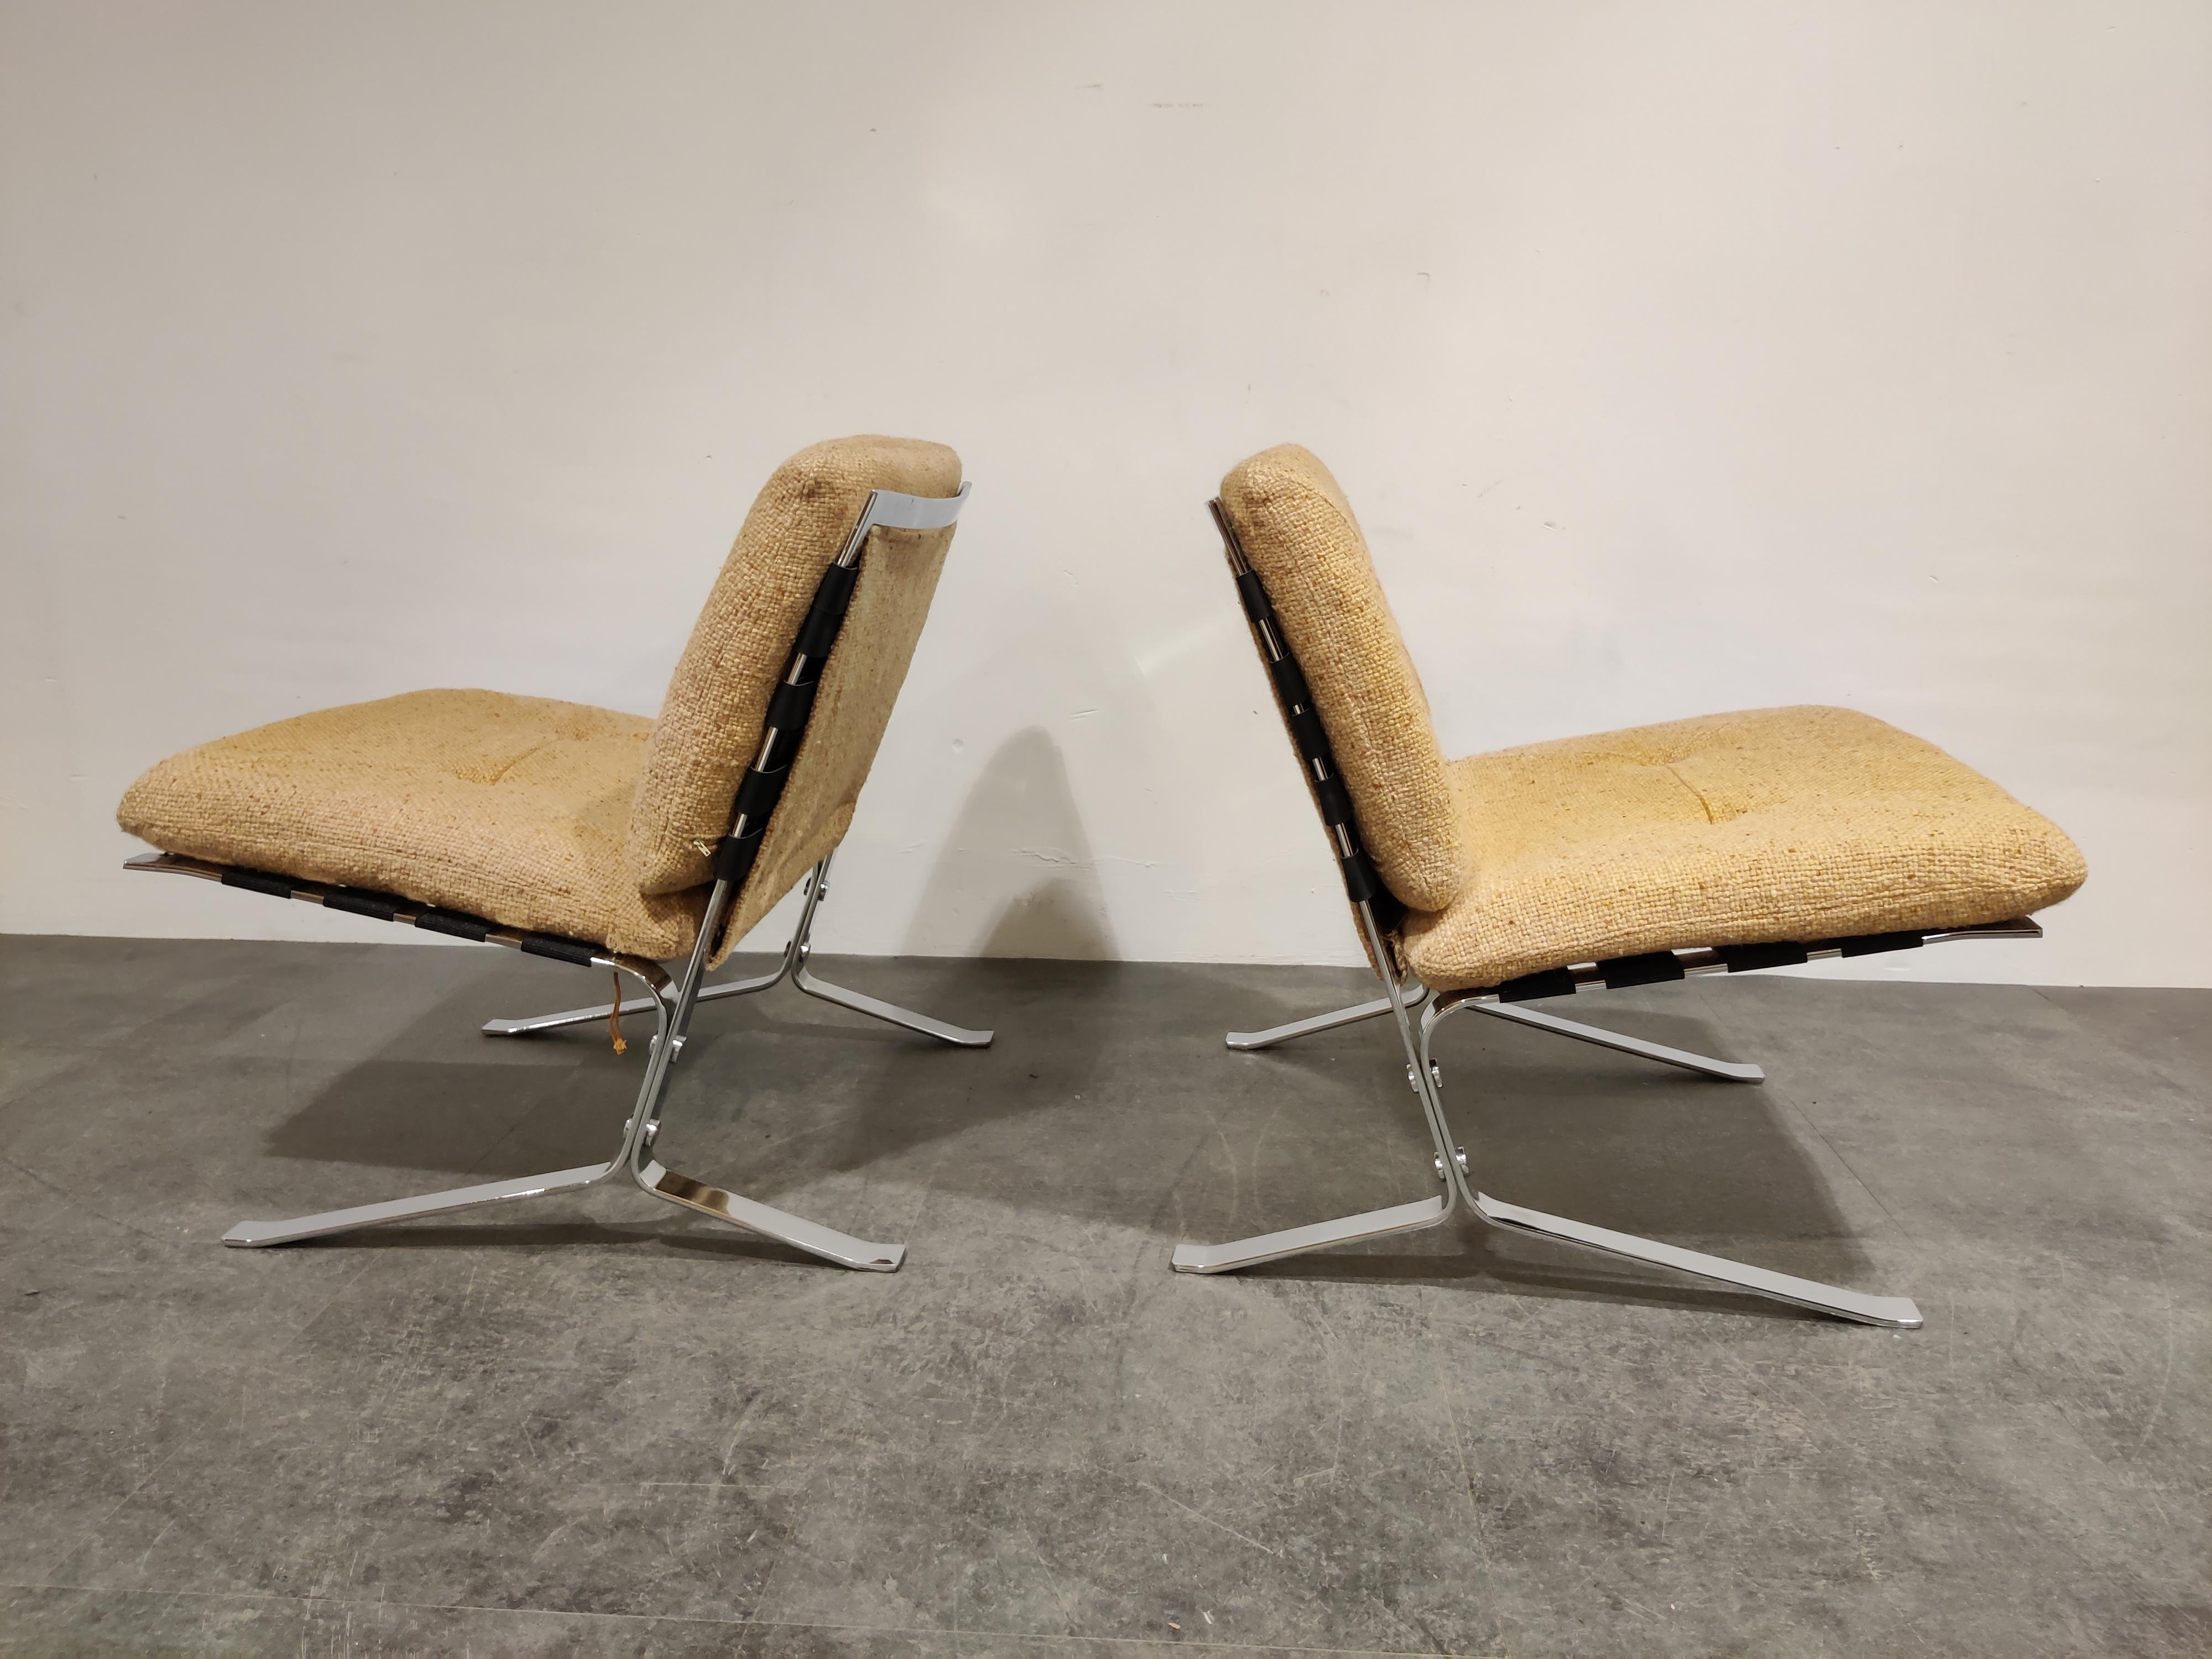 Pair of vintage Joker lounge chairs designed by Olivier Mourgue for Airborne International.

Beautiful, timeless designed chromed steel frames with their original beige fabric upholstery.

1970s - France

Good condition.

Dimensions
Height: